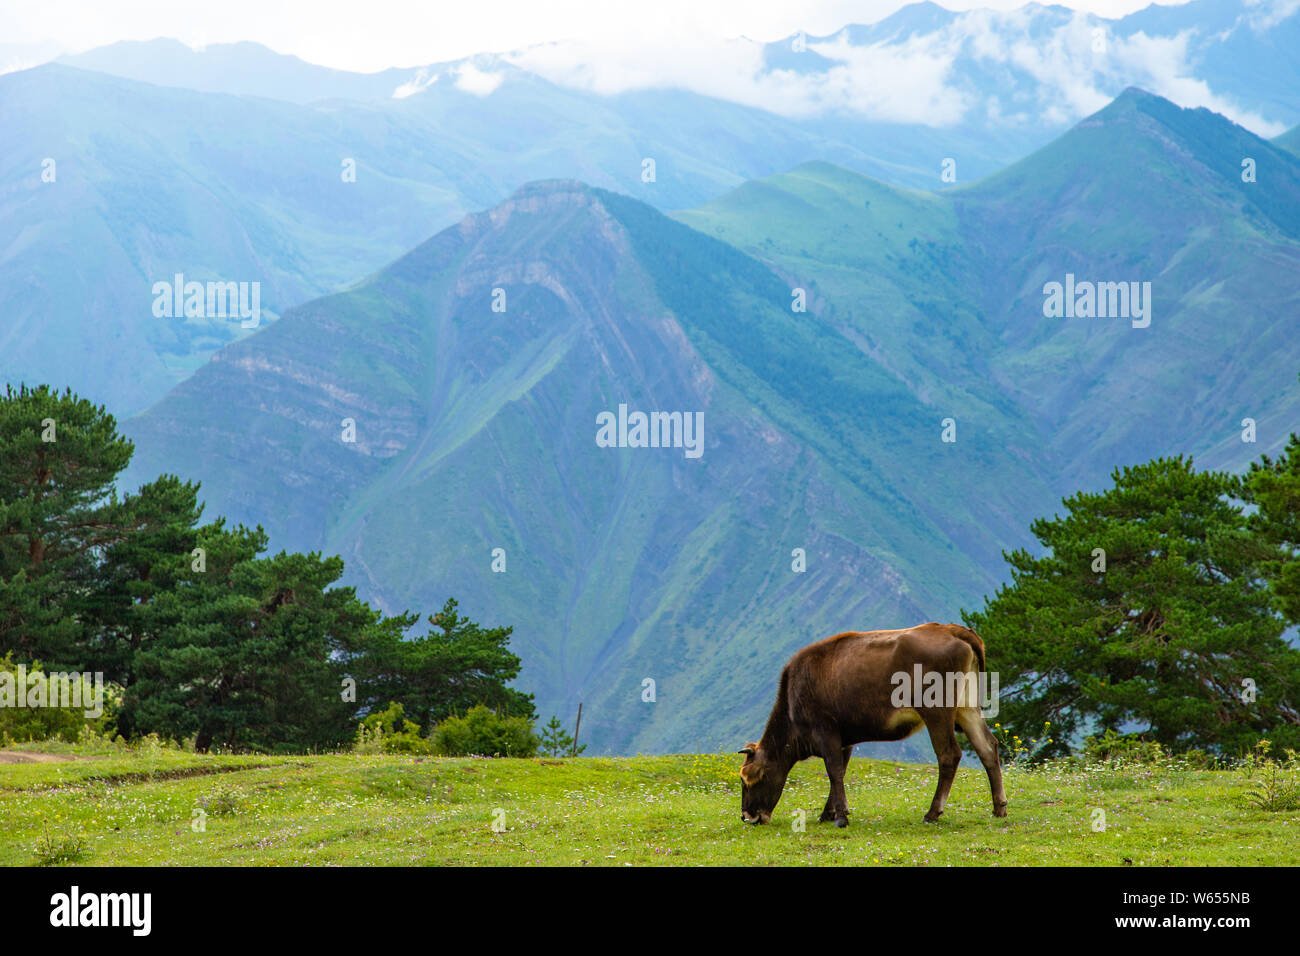 The cow to graze in the Alpine meadows of the mountains in the background Stock Photo